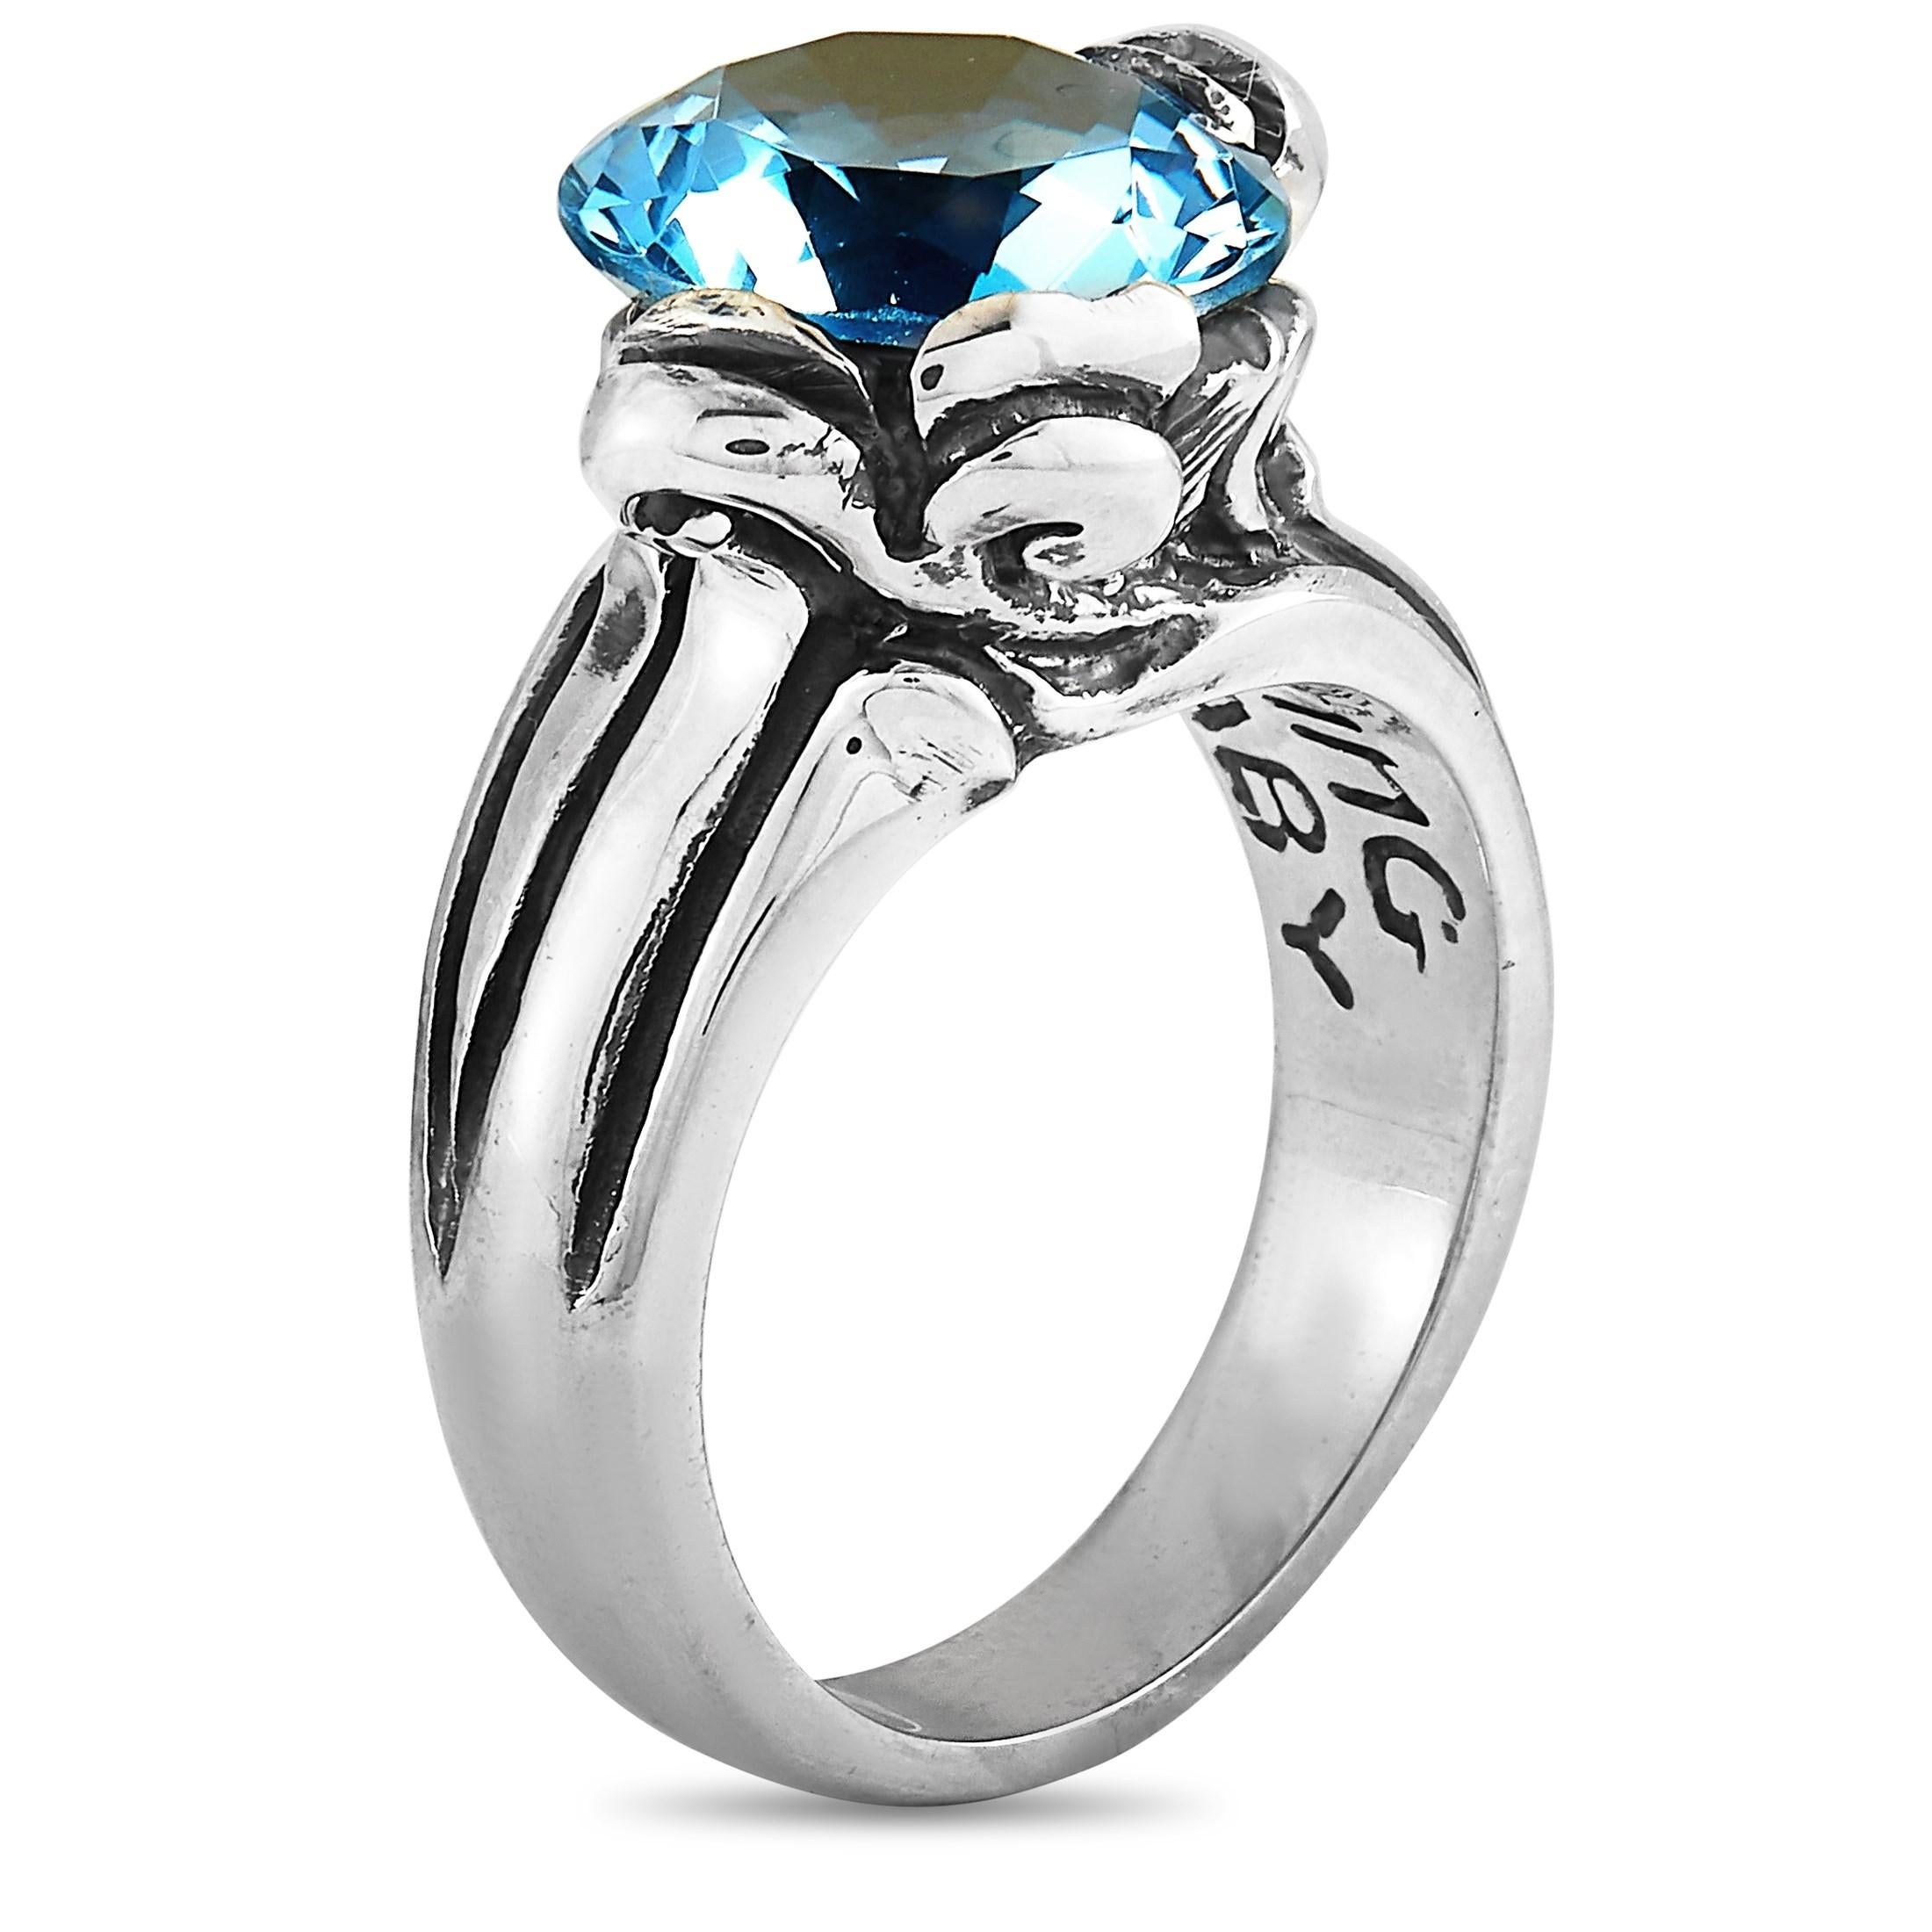 This King Baby ring is crafted from silver and set with a 13 mm blue topaz stone. The ring weighs 16.8 grams and boasts a band thickness of 4 mm and a top height of 10 mm, while top dimensions measure 19 by 16 mm.

Offered in brand-new condition,